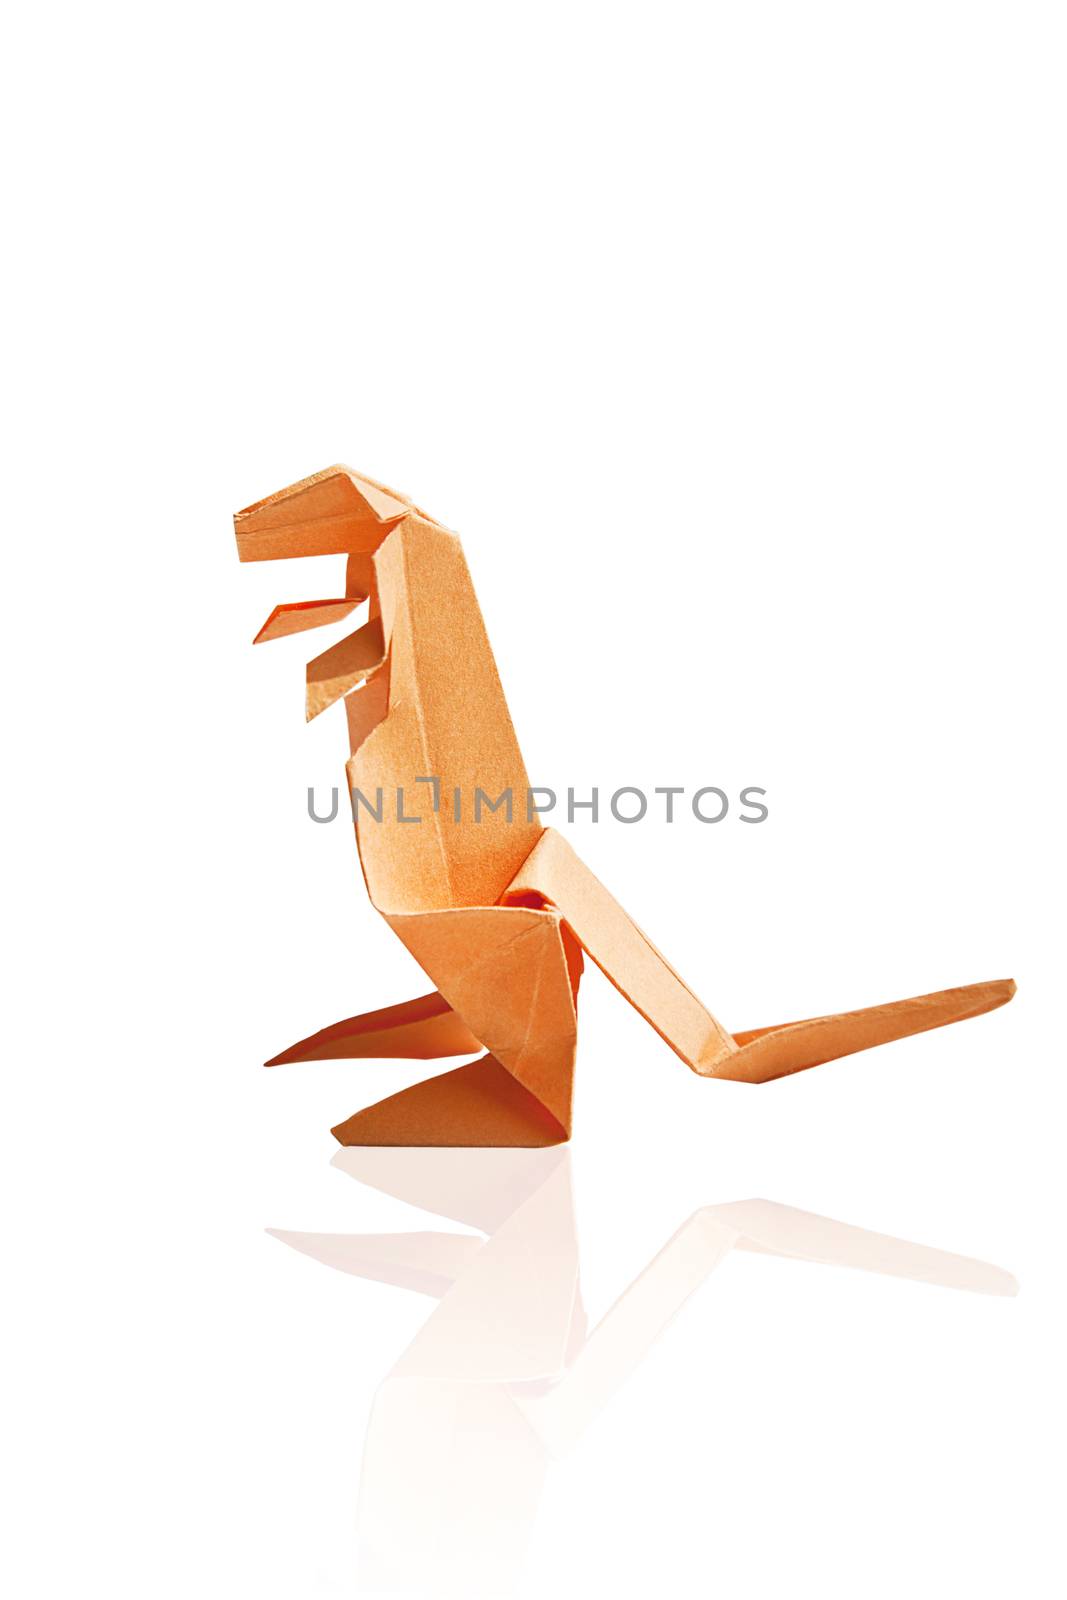 Origami isolated. by eskymaks